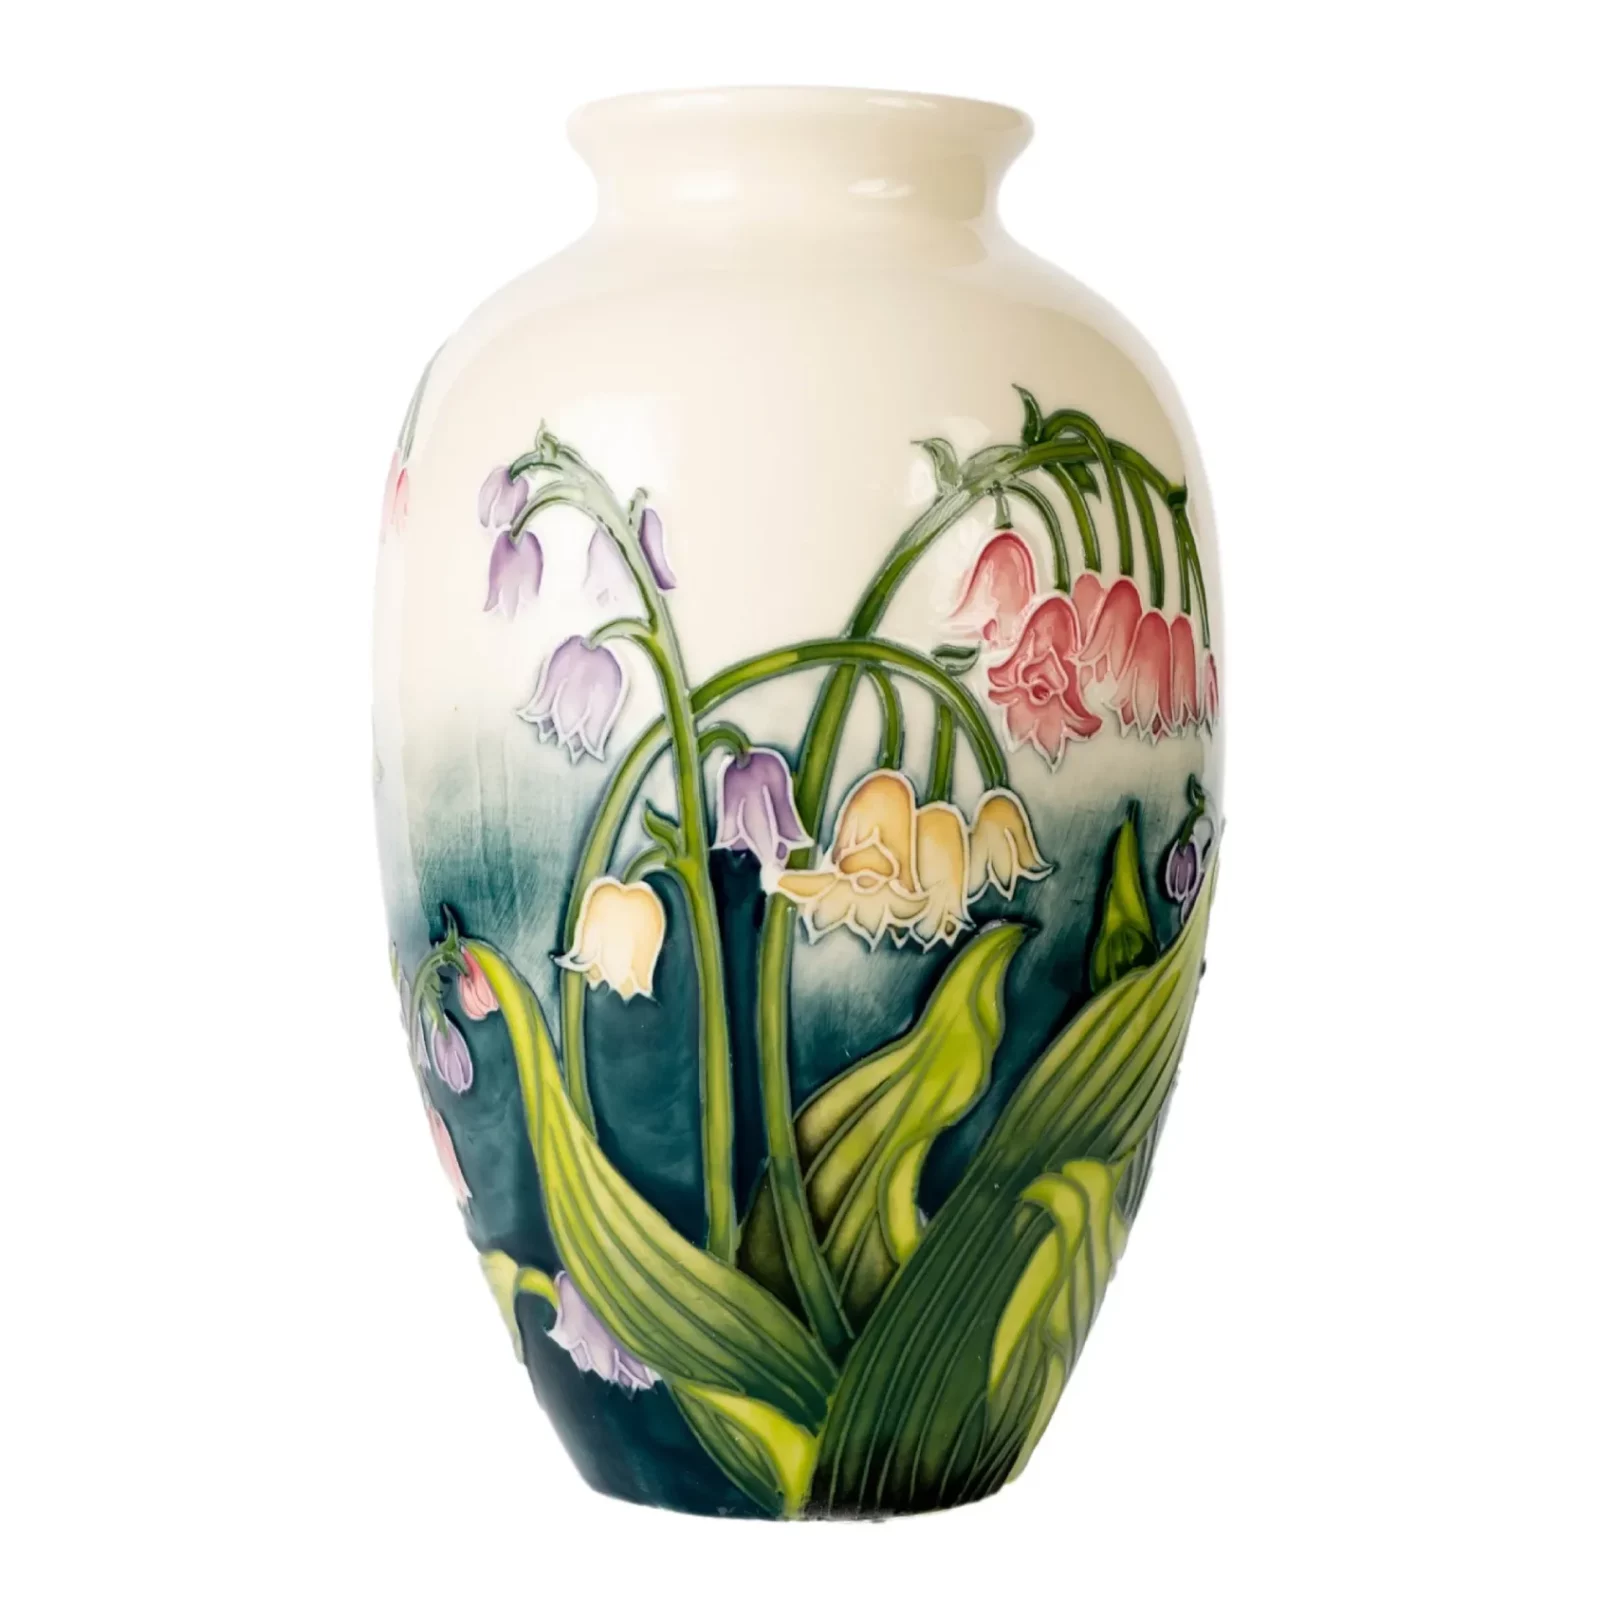 base green and top cream with tube lined lily flowers rising on all sides, an elegant vase